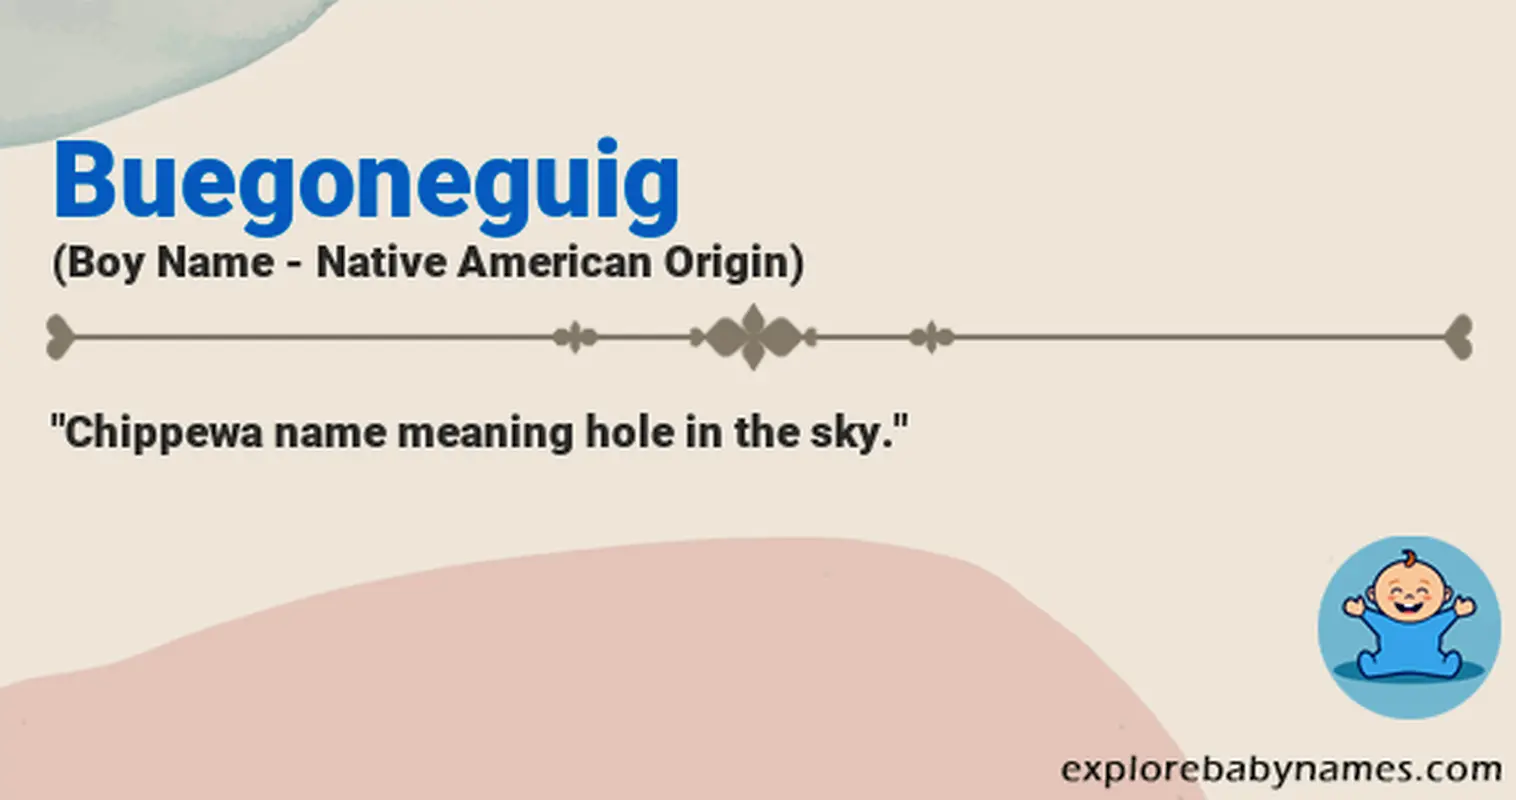 Meaning of Buegoneguig